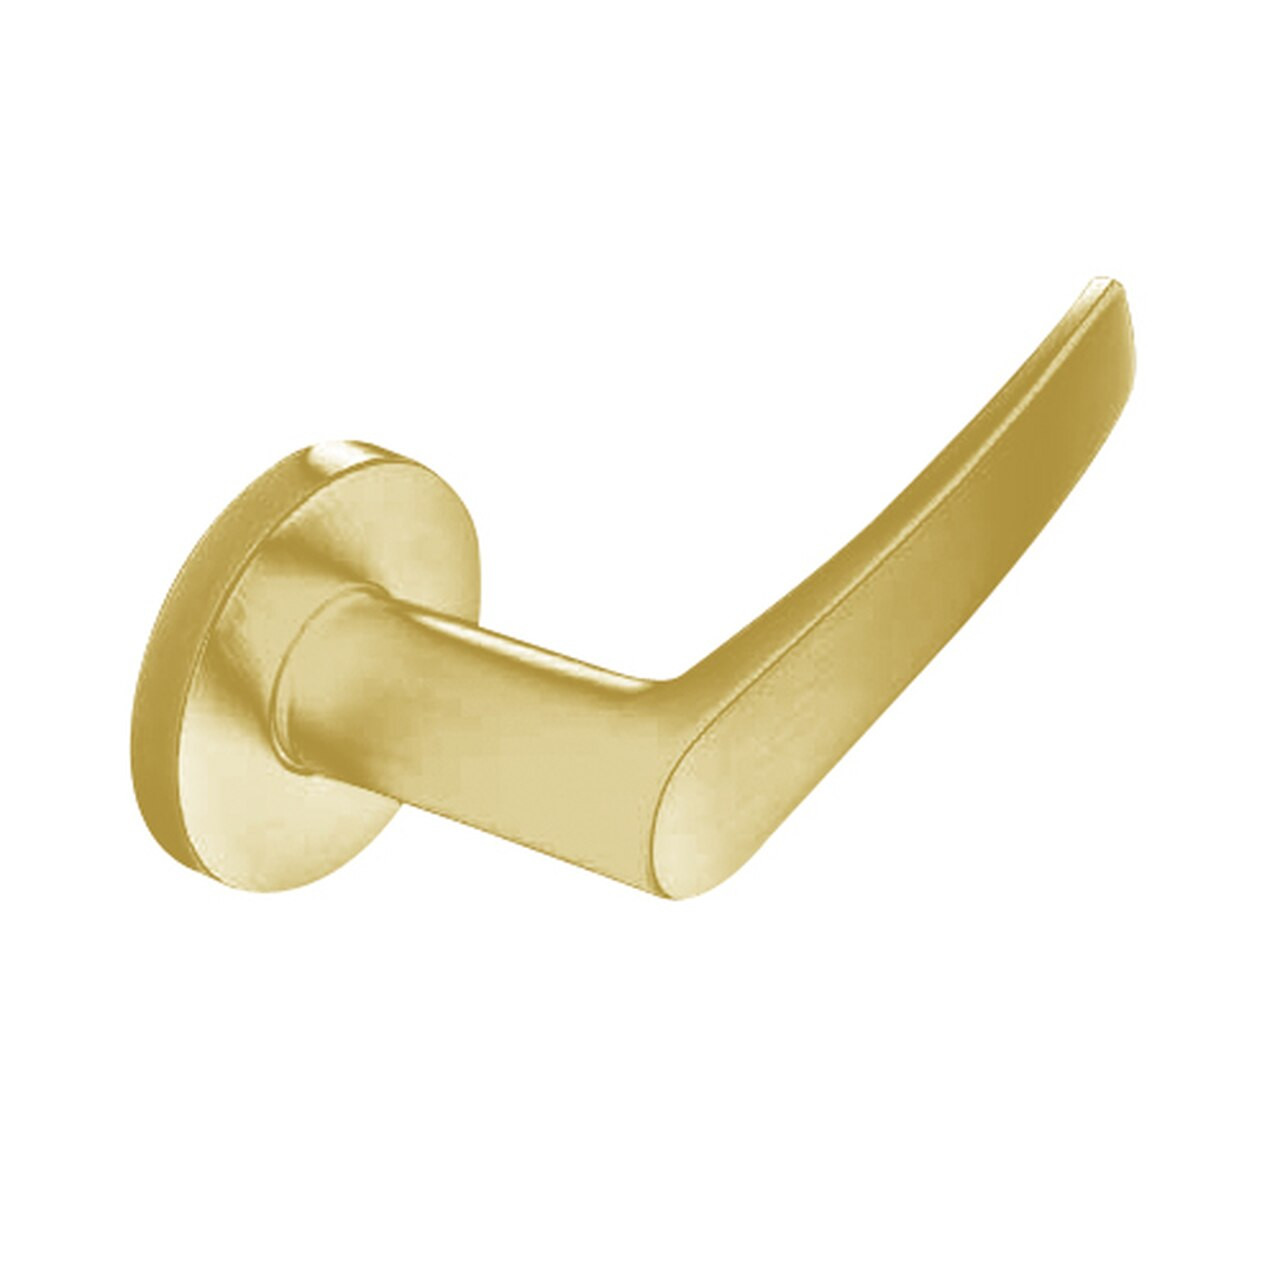 ML2053-ASA-605-LC Corbin Russwin ML2000 Series Mortise Entrance Locksets with Armstrong Lever in Bright Brass